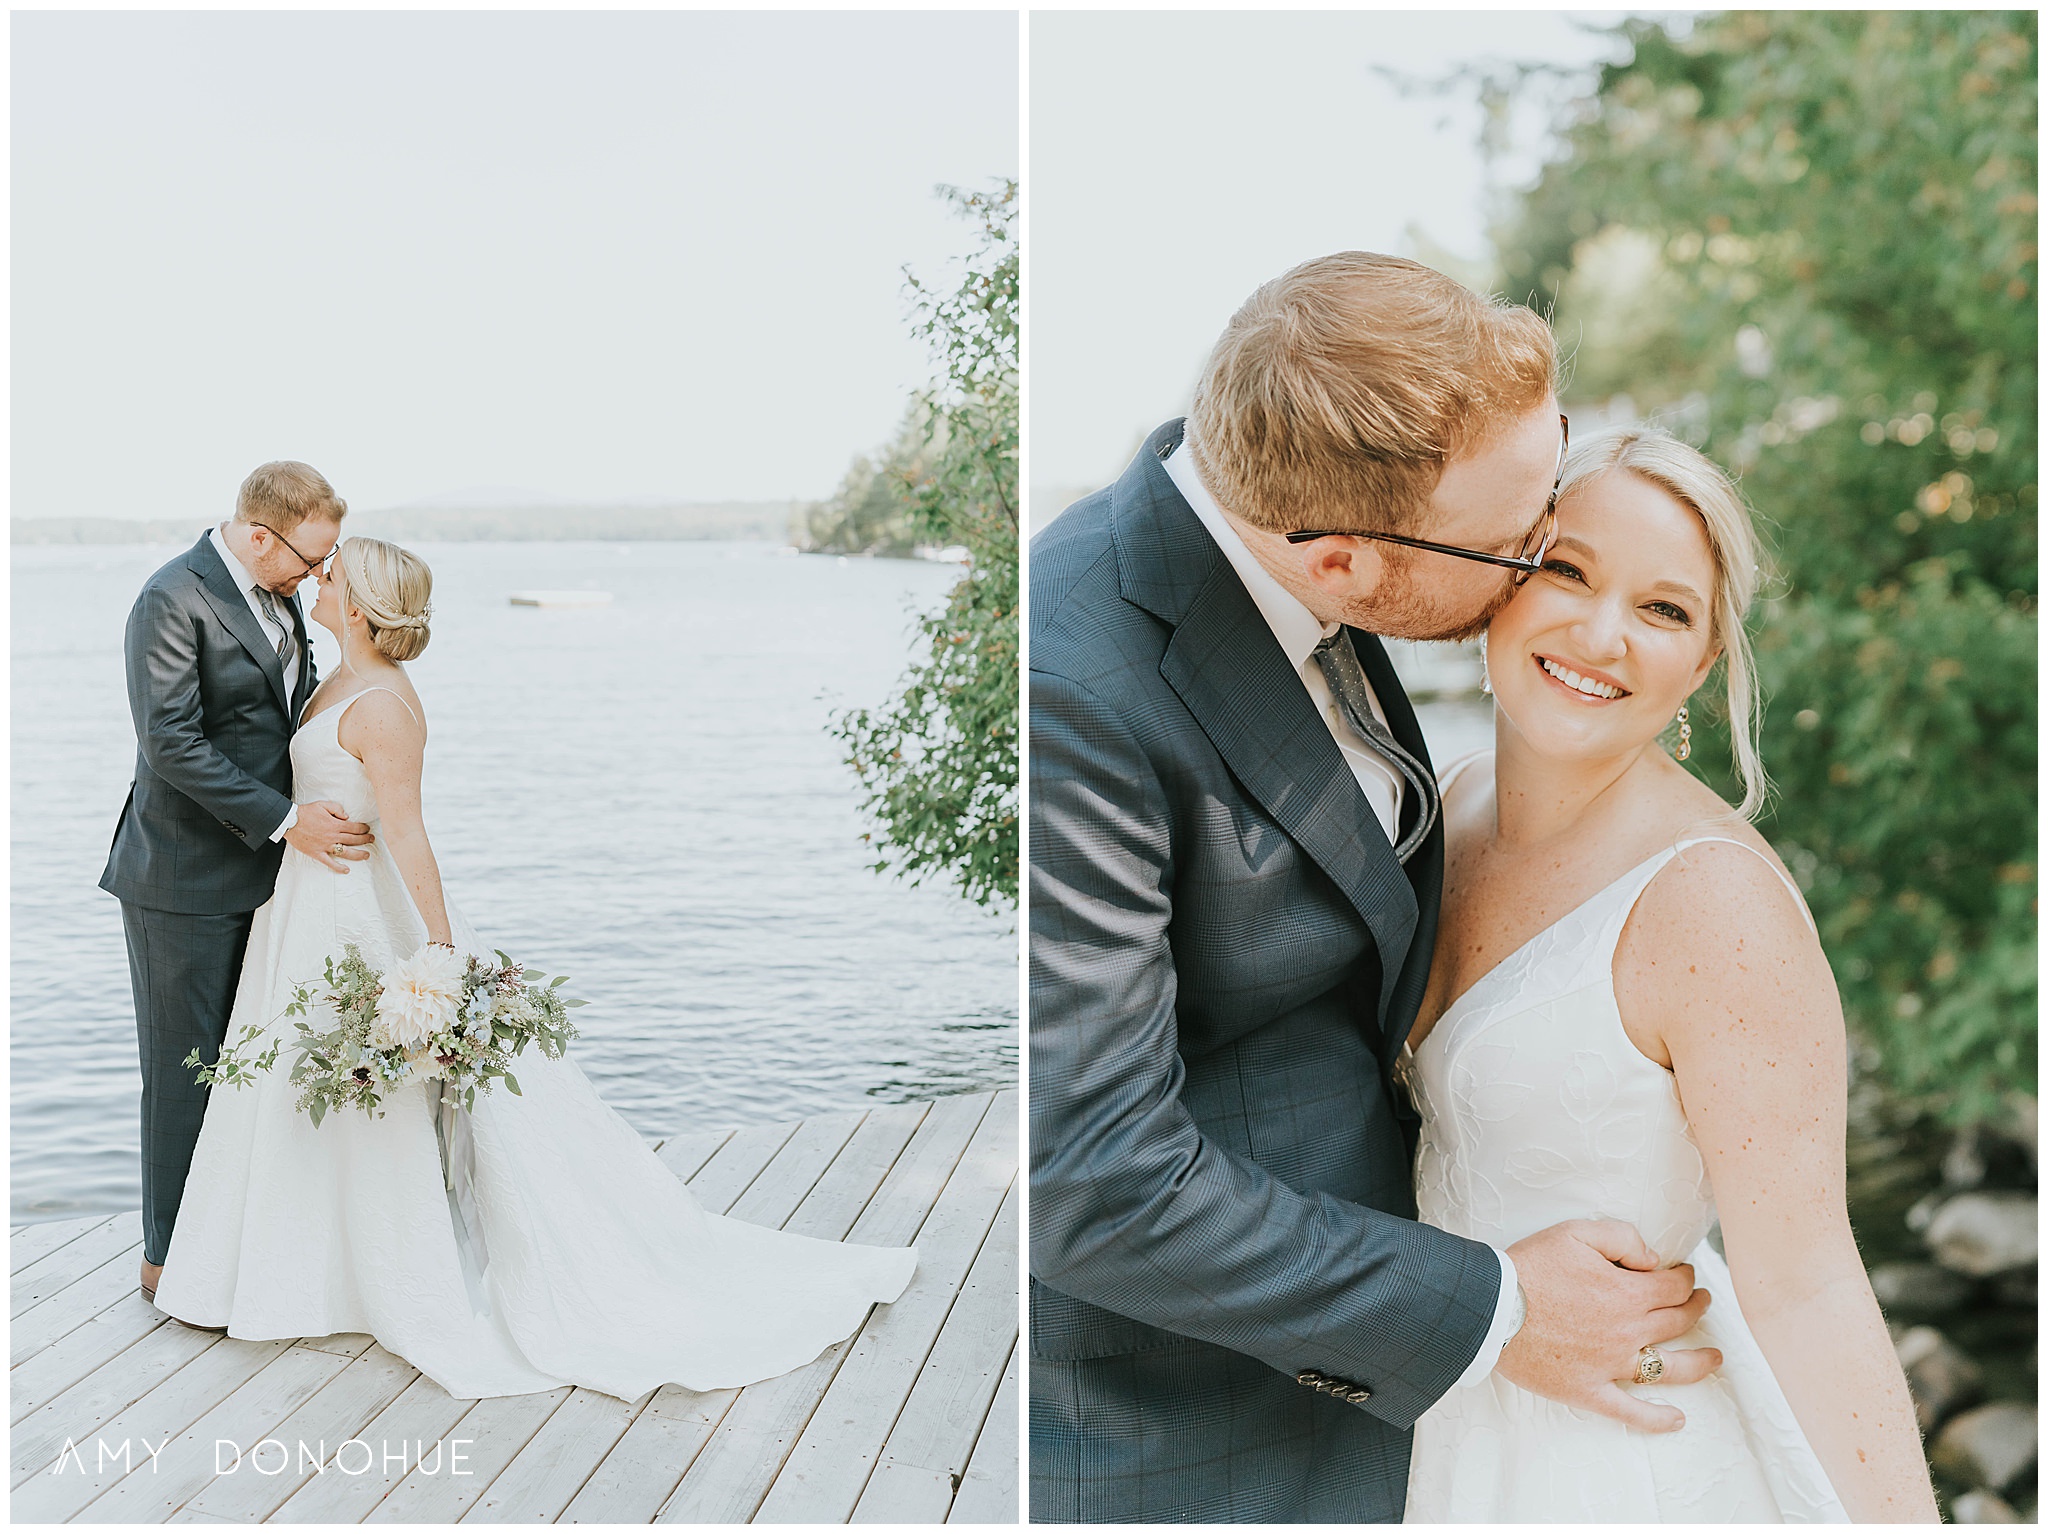 Bride & Groom Portraits | The Prism House Event Design & Wedding Planning | New Hampshire Wedding Photographer | © Amy Donohue Photography